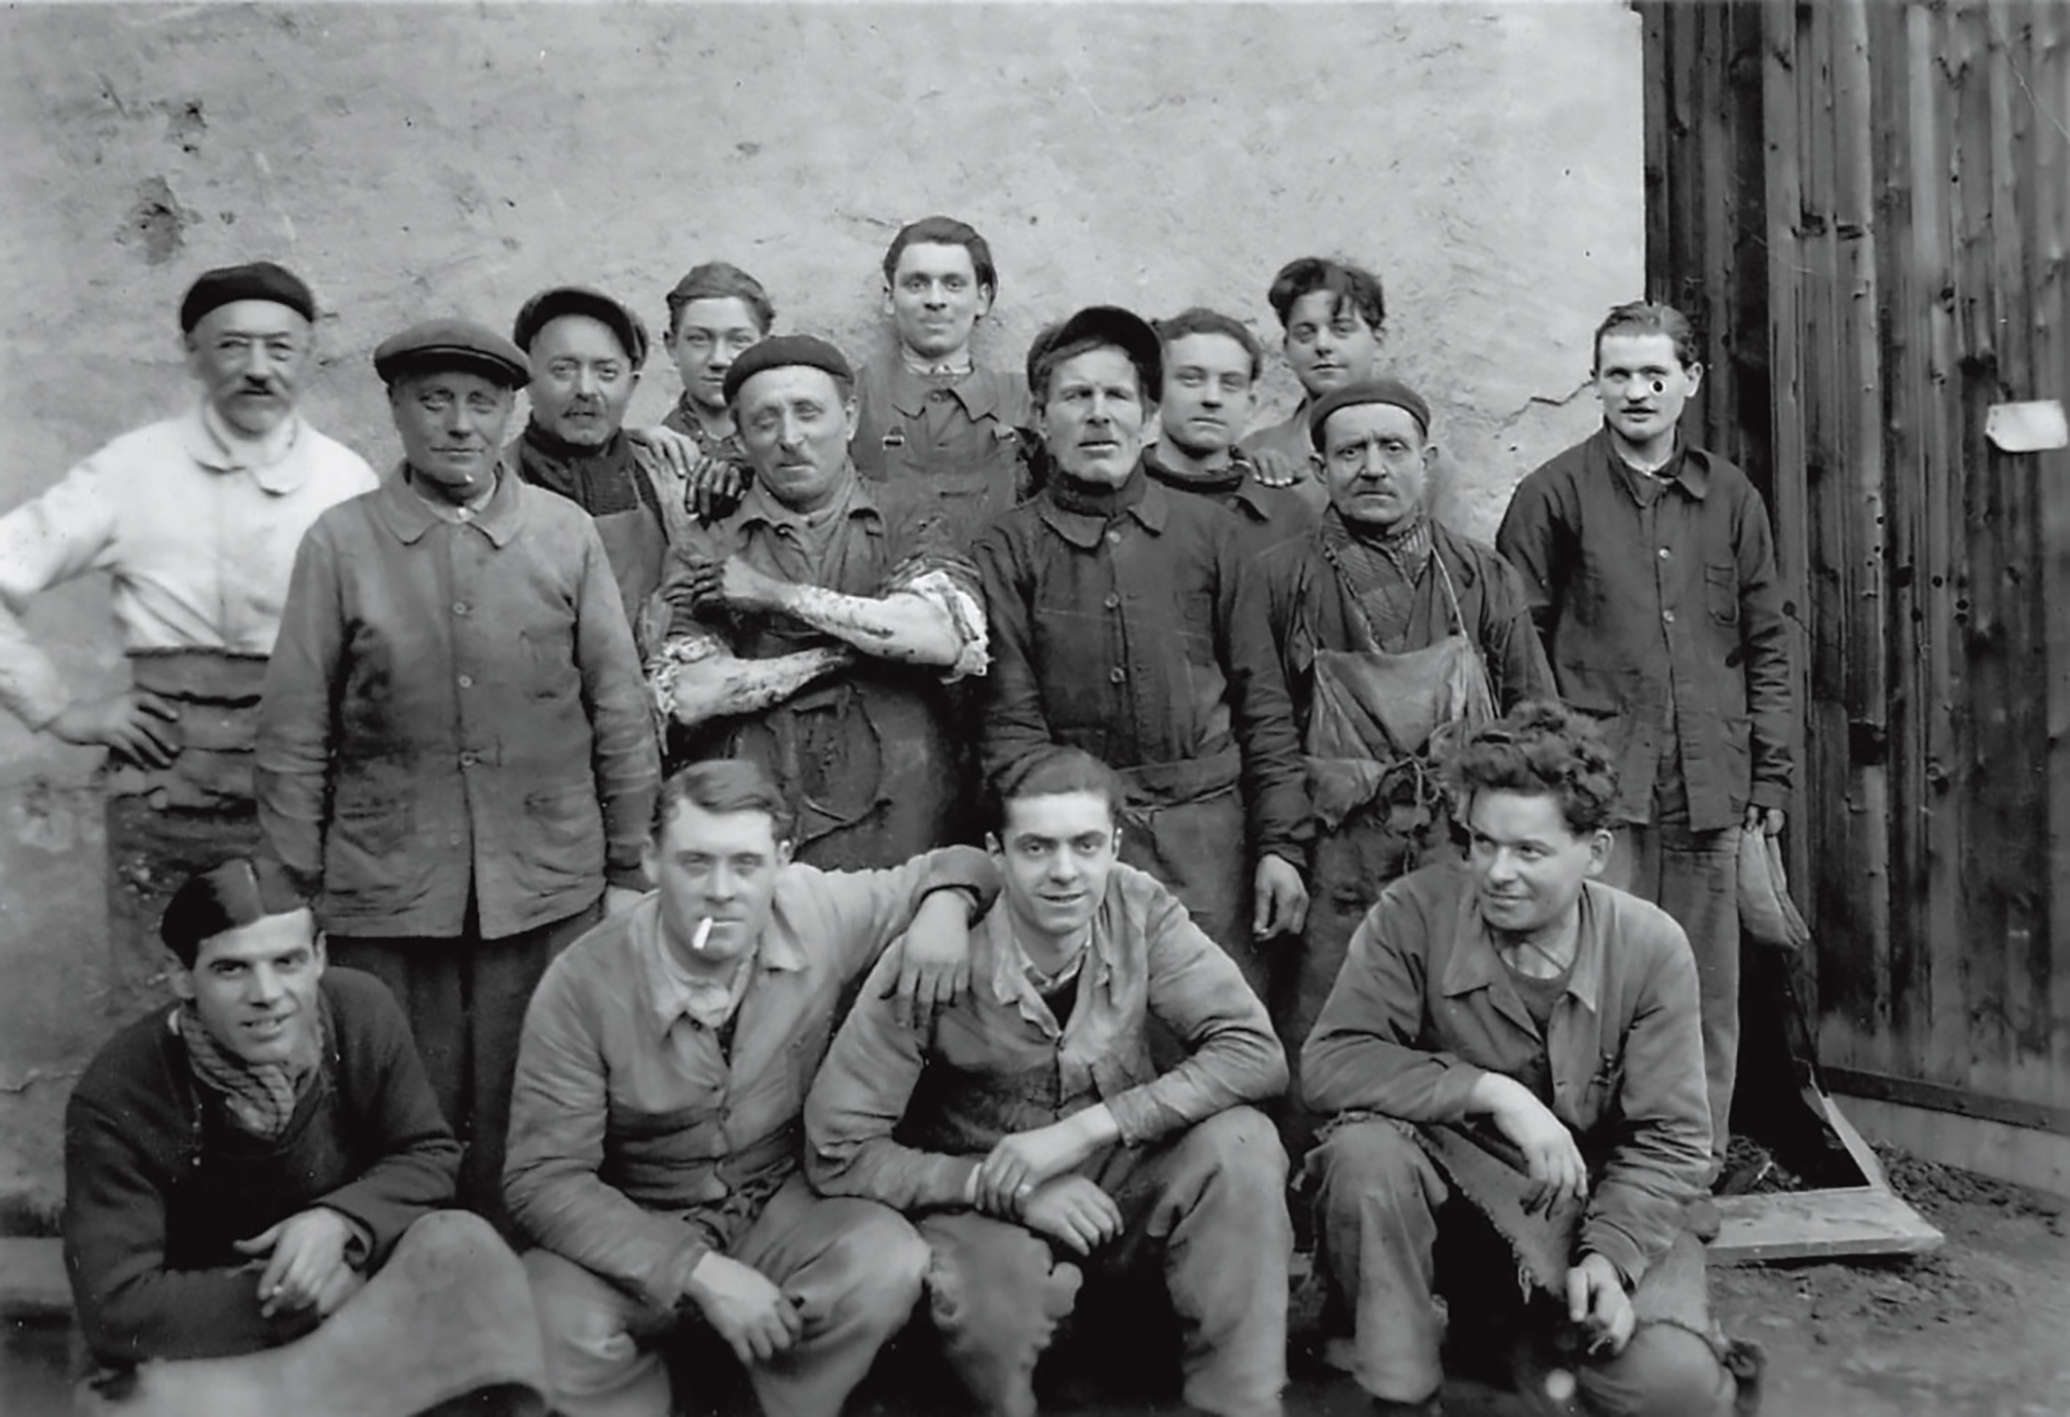 Workers outside the workshop, c. 1939.